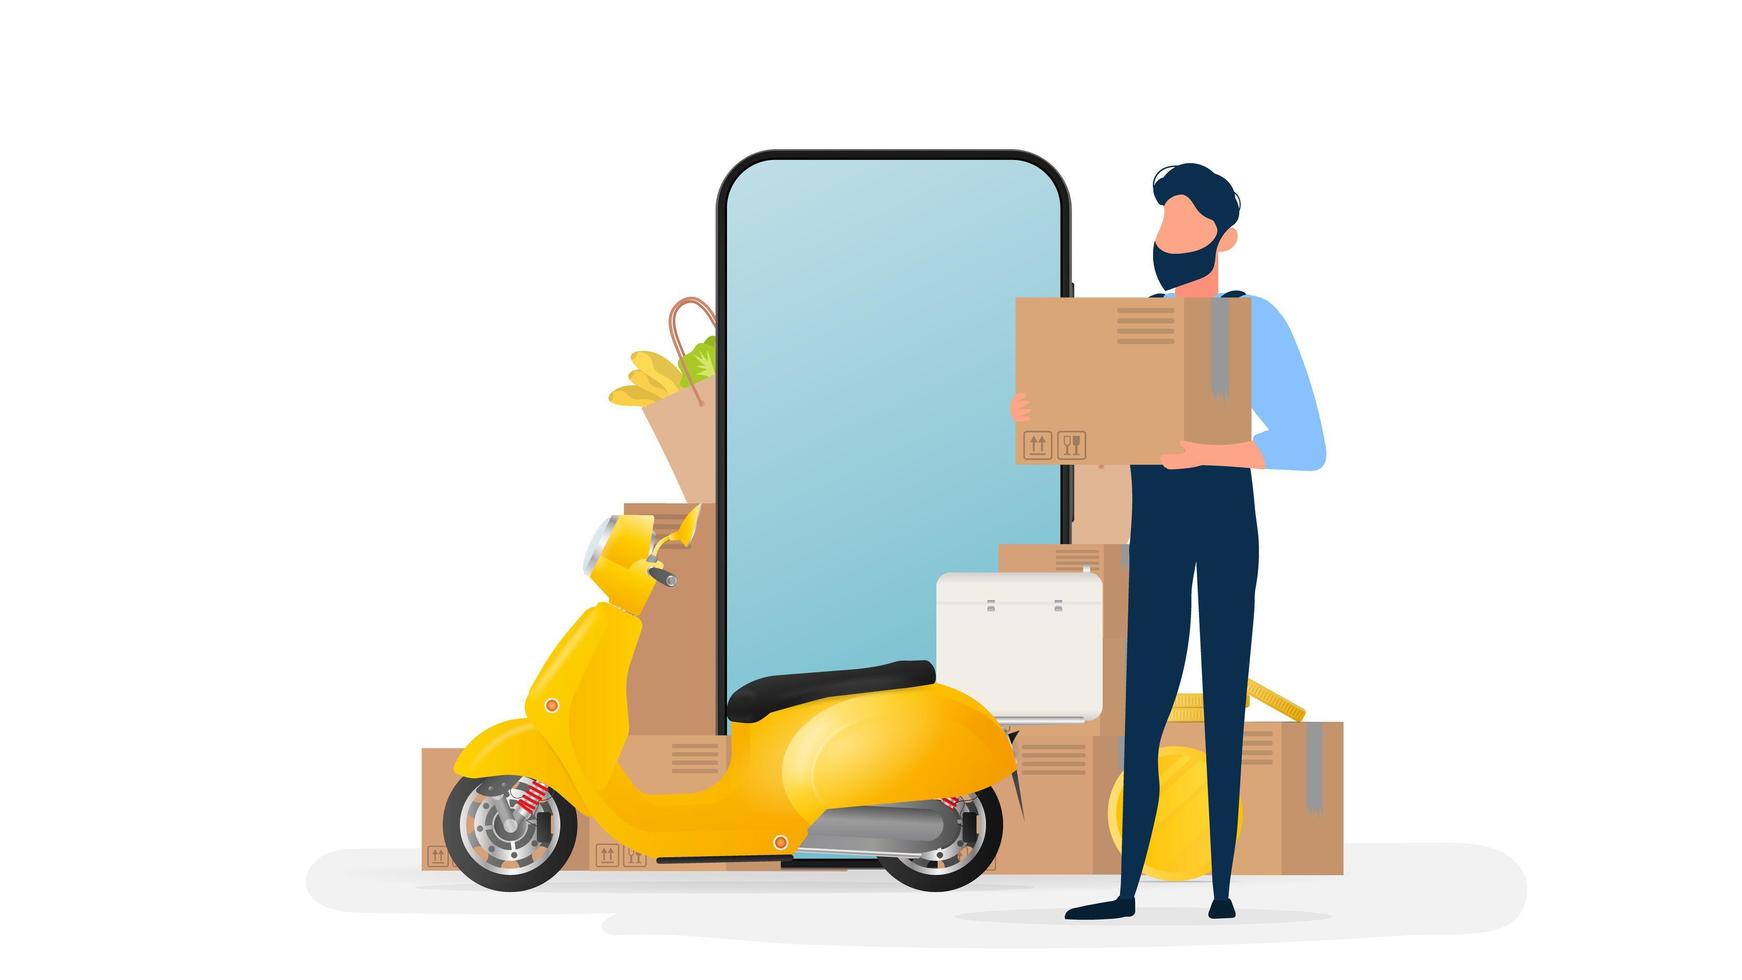 Collage on the theme of delivery. The guy is holding a box. Yellow scooter with food shelf, telephone, gold coins, cardboard boxes, paper grocery bag. vector